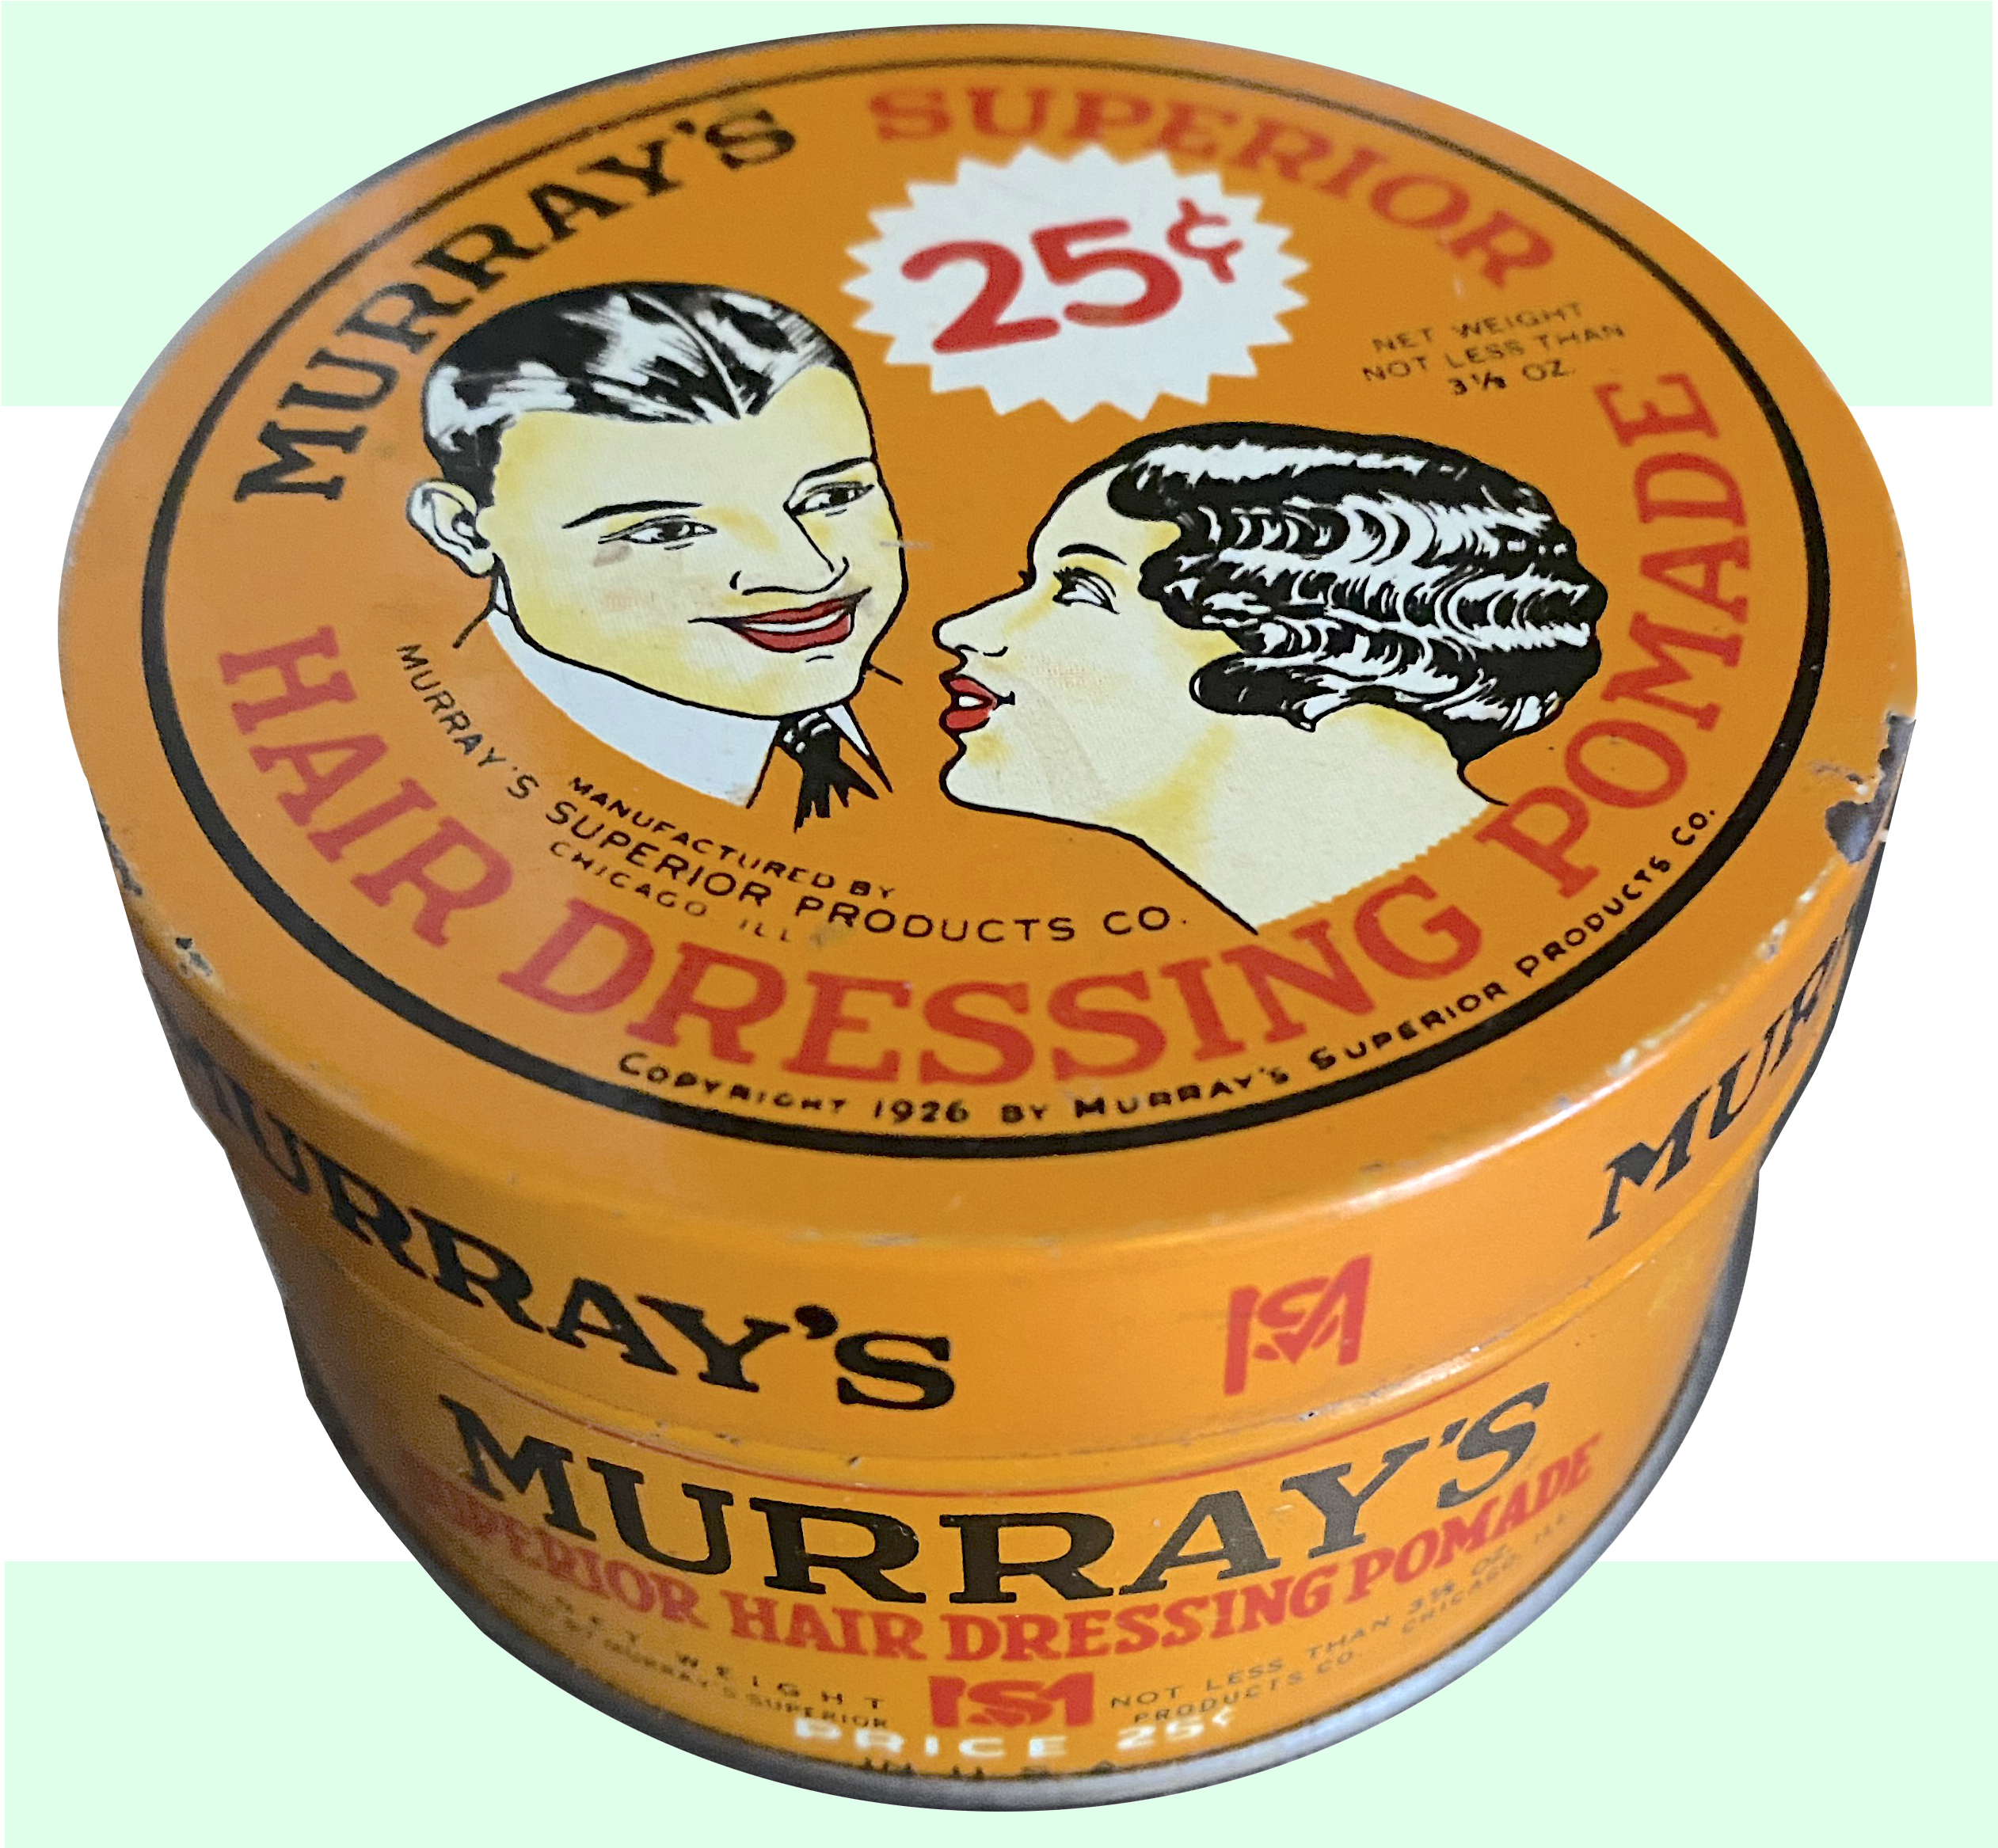 Murray's Superior Products Co., est. 1925 - Made-in-Chicago Museum